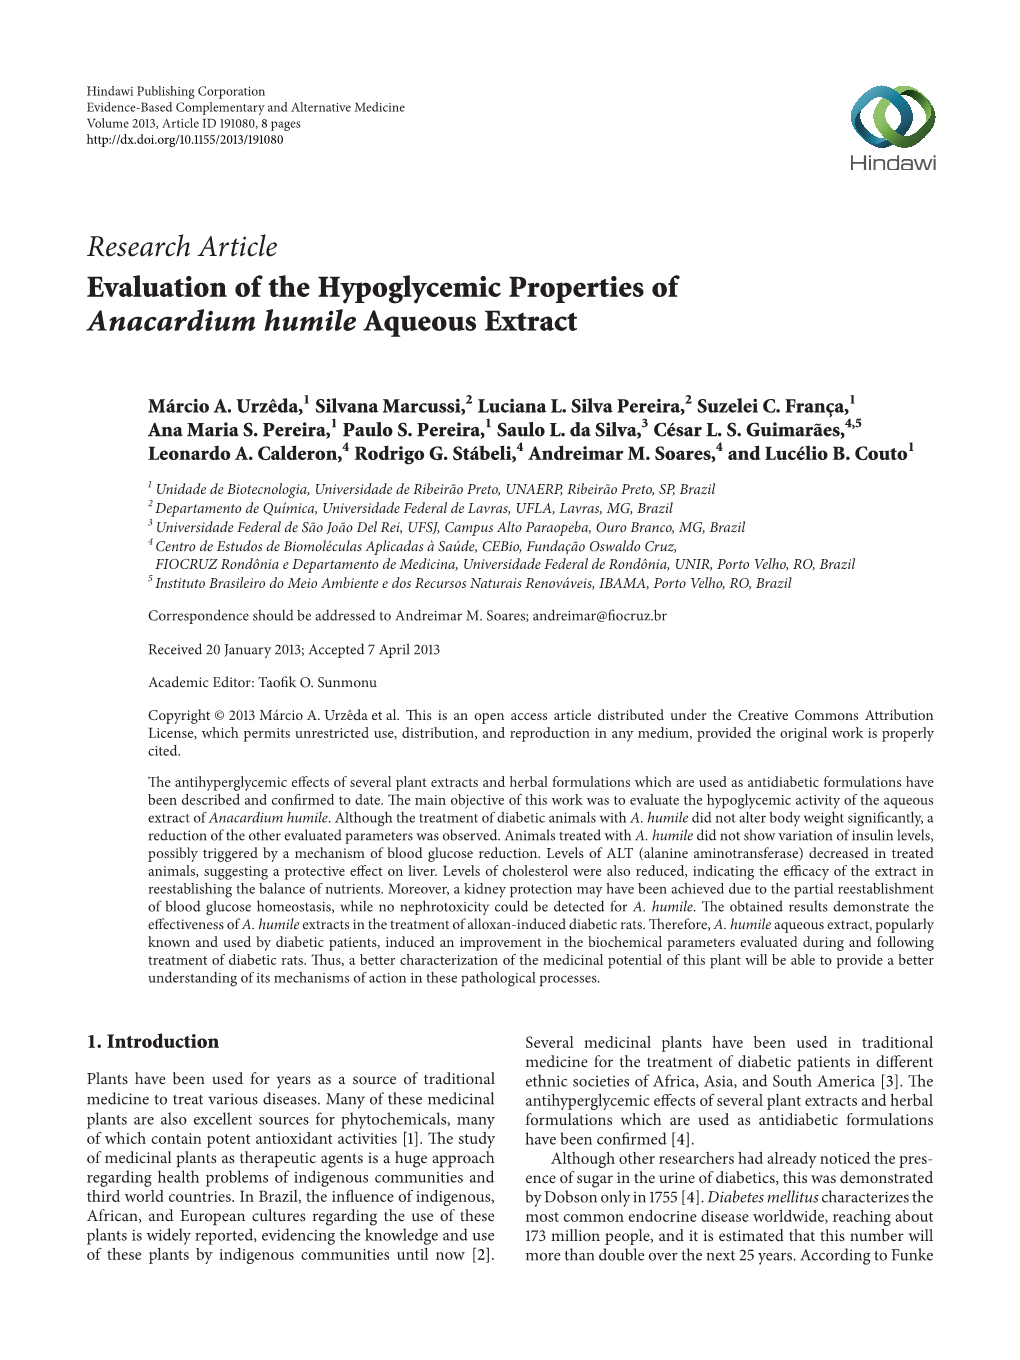 Research Article Evaluation of the Hypoglycemic Properties of Anacardium Humile Aqueous Extract